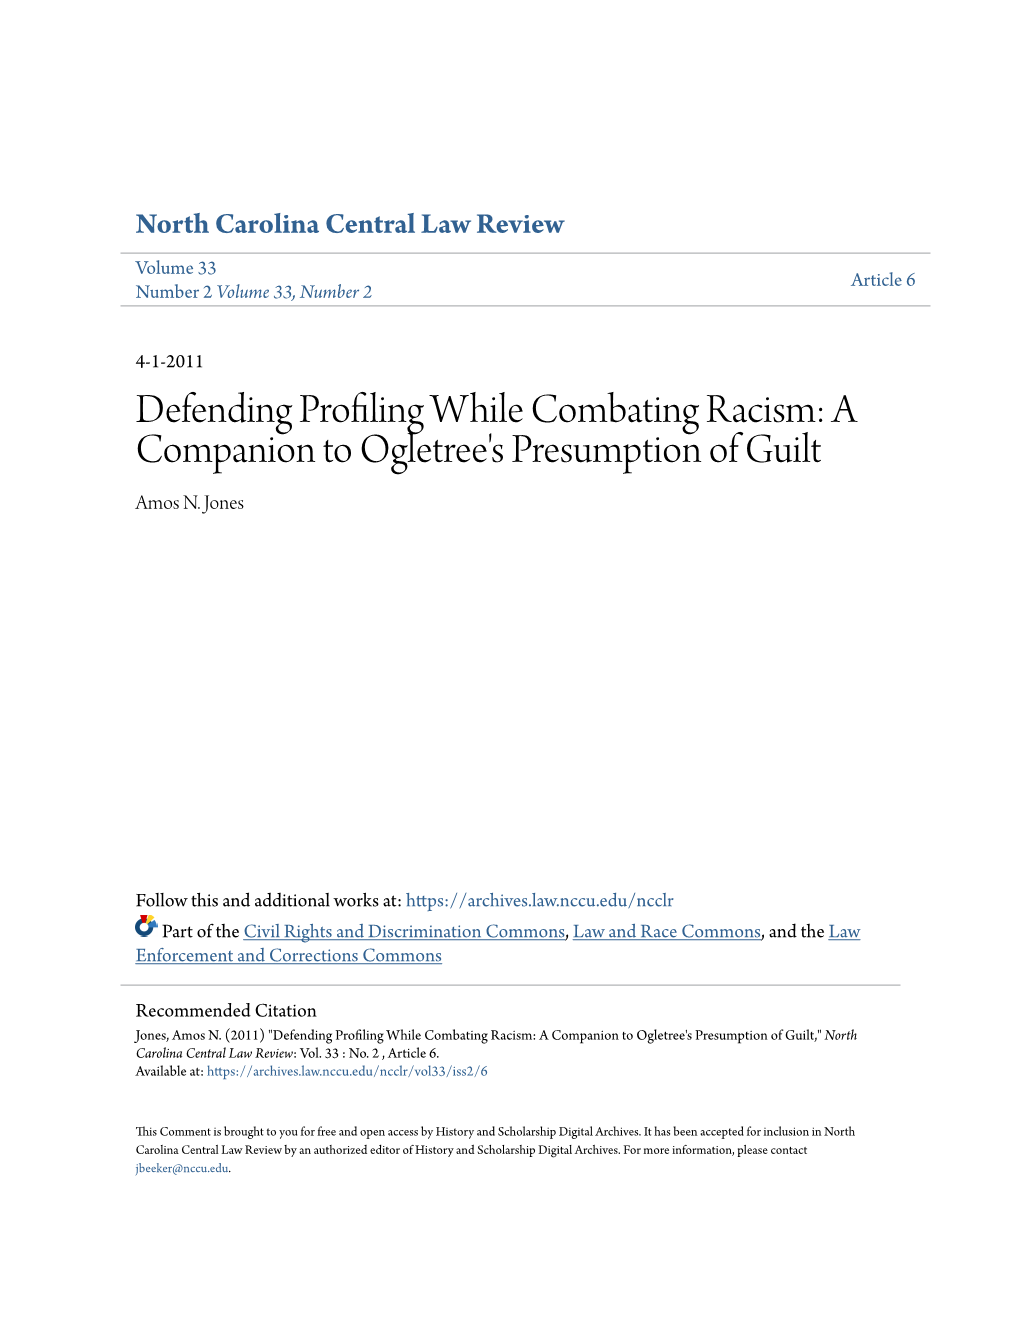 Defending Profiling While Combating Racism: a Companion to Ogletree's Presumption of Guilt Amos N